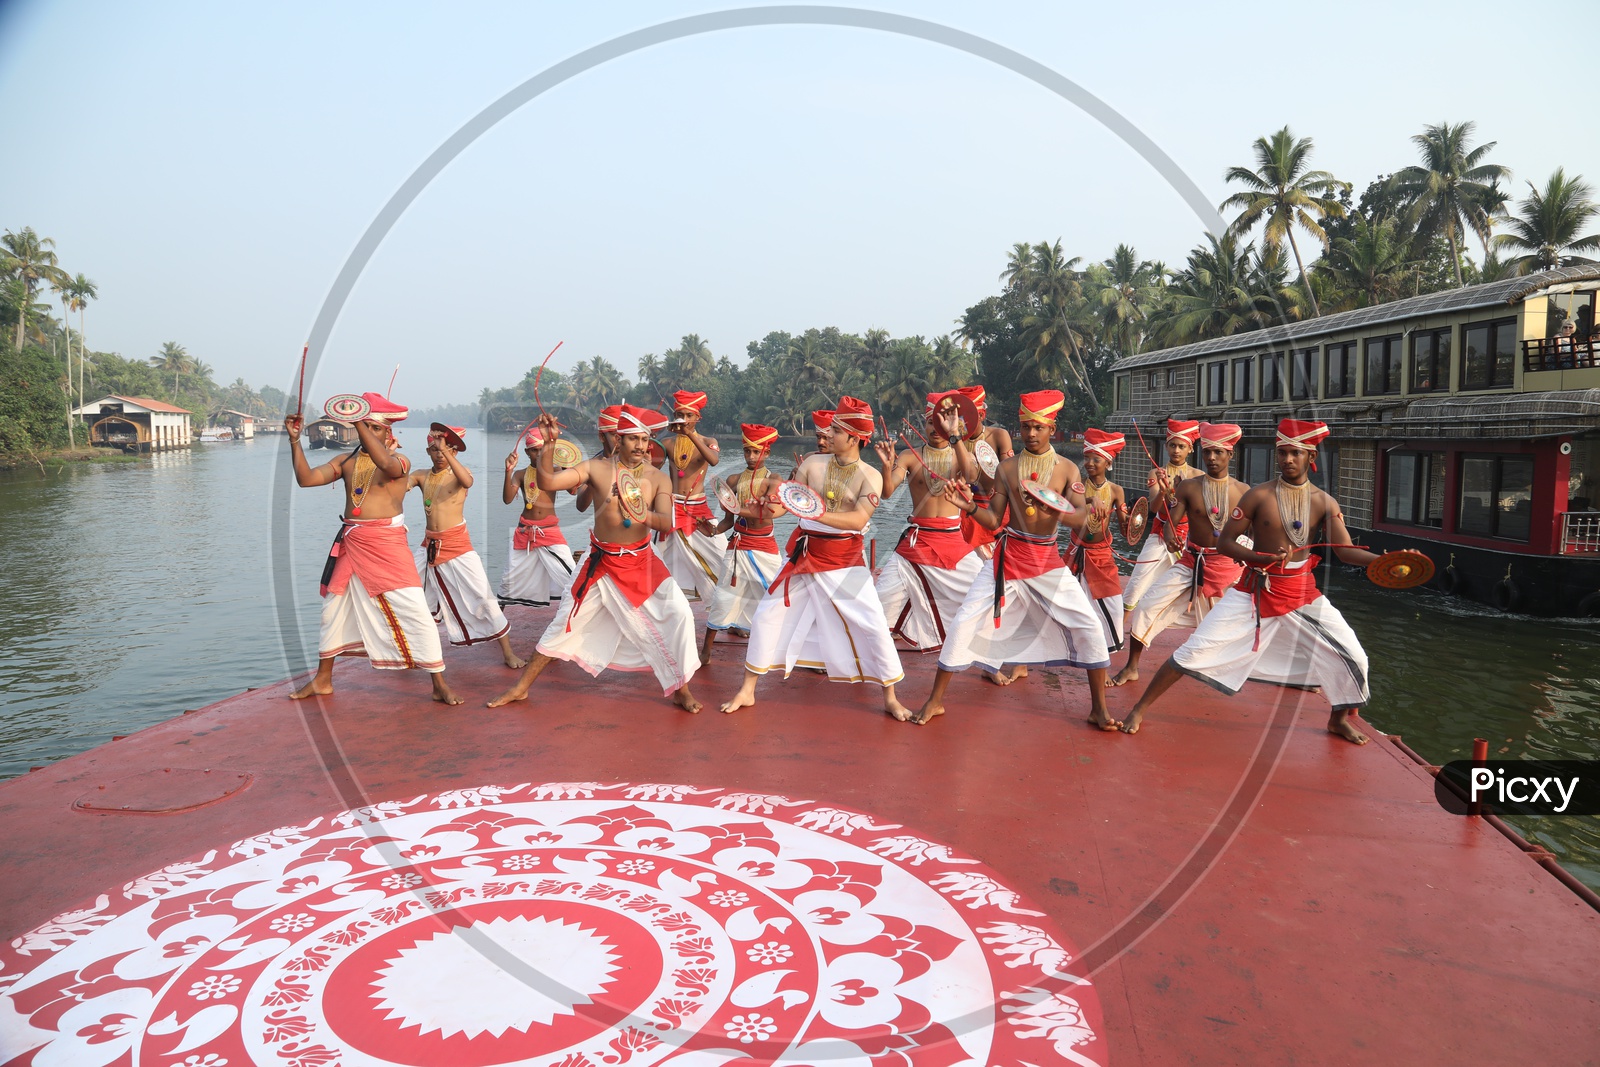 A Group Of Dancers In Kerala Traditional Dancers Attire Dancing On a Boat With Kerala Backwaters Background